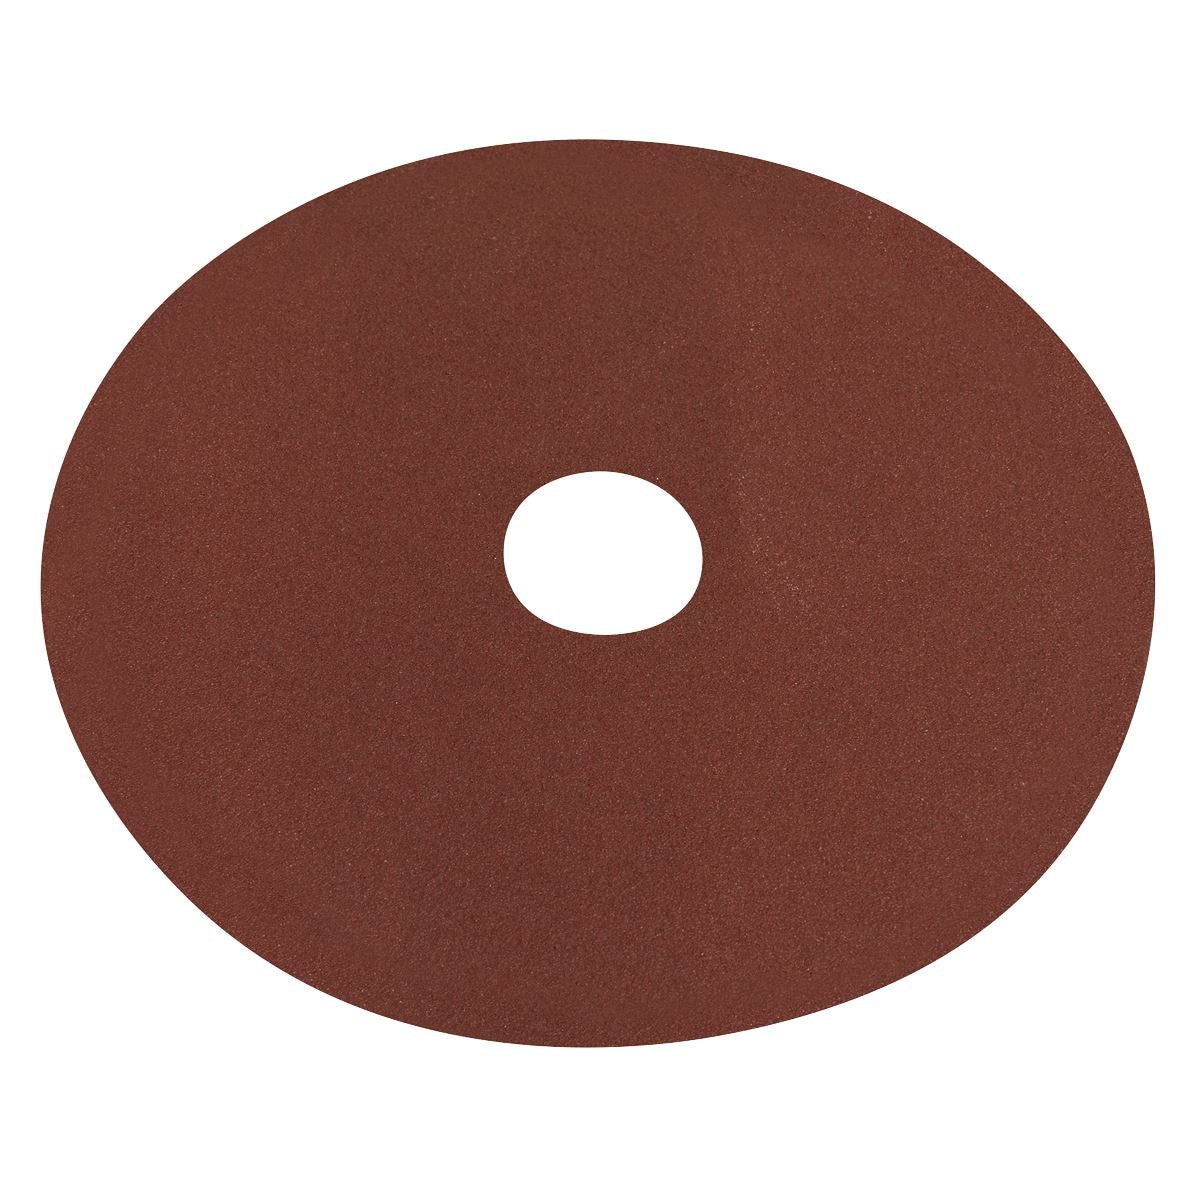 Worksafe by Sealey Fibre Backed Disc Ø125mm - 80Grit Pack of 25